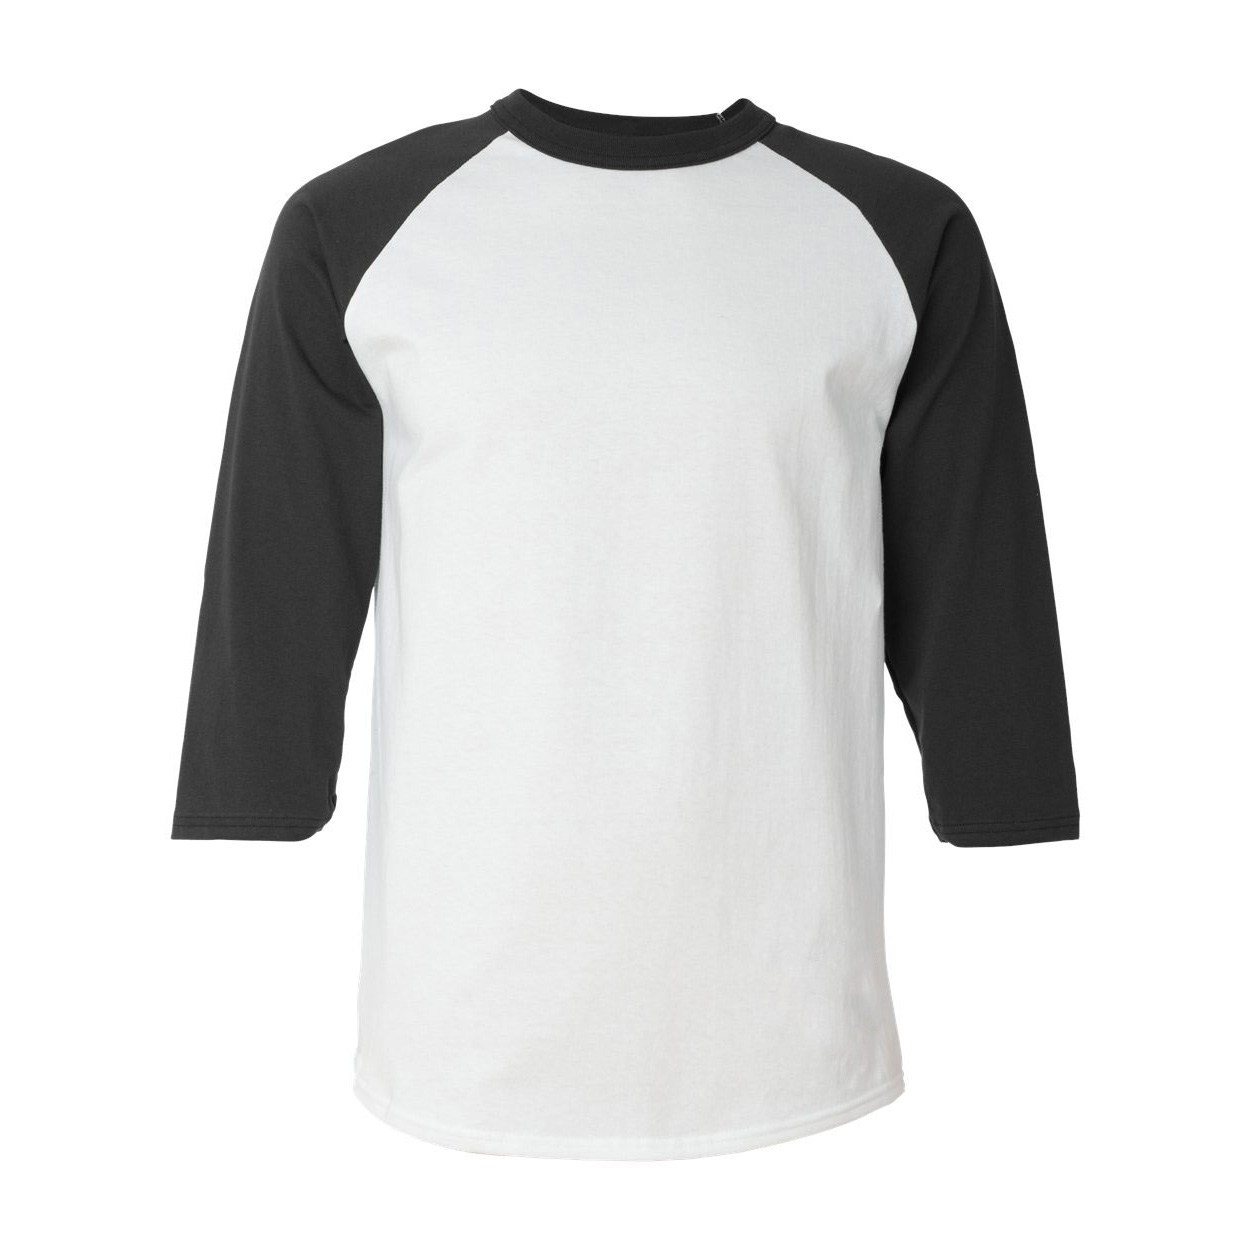 Transtra Apparels – Manufacturing all kind of high quality Sports ...